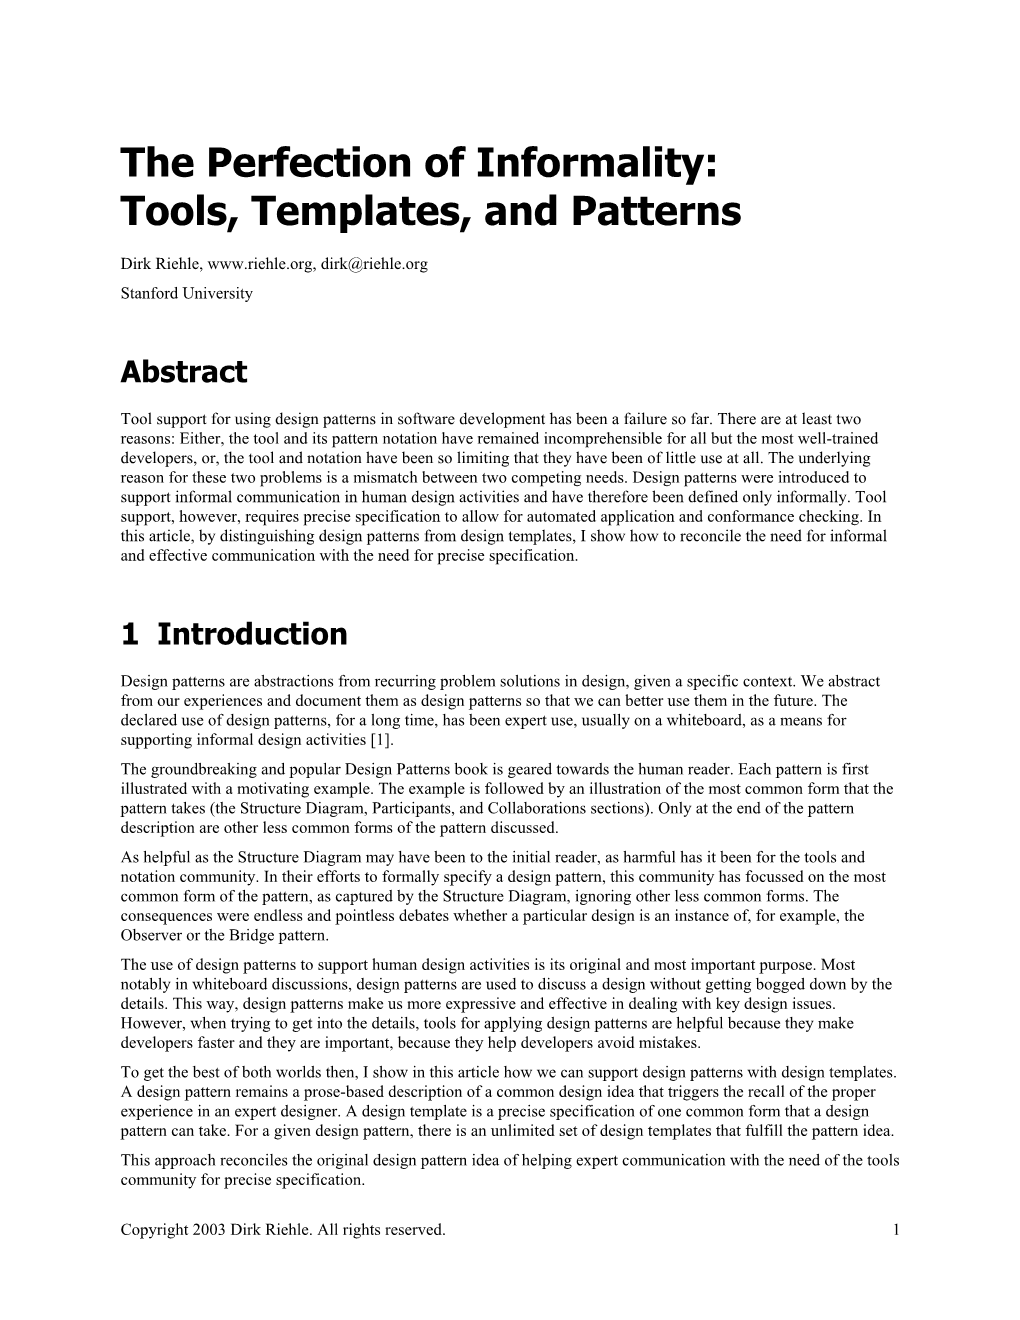 The Perfection of Informality: Tools, Templates, and Patterns